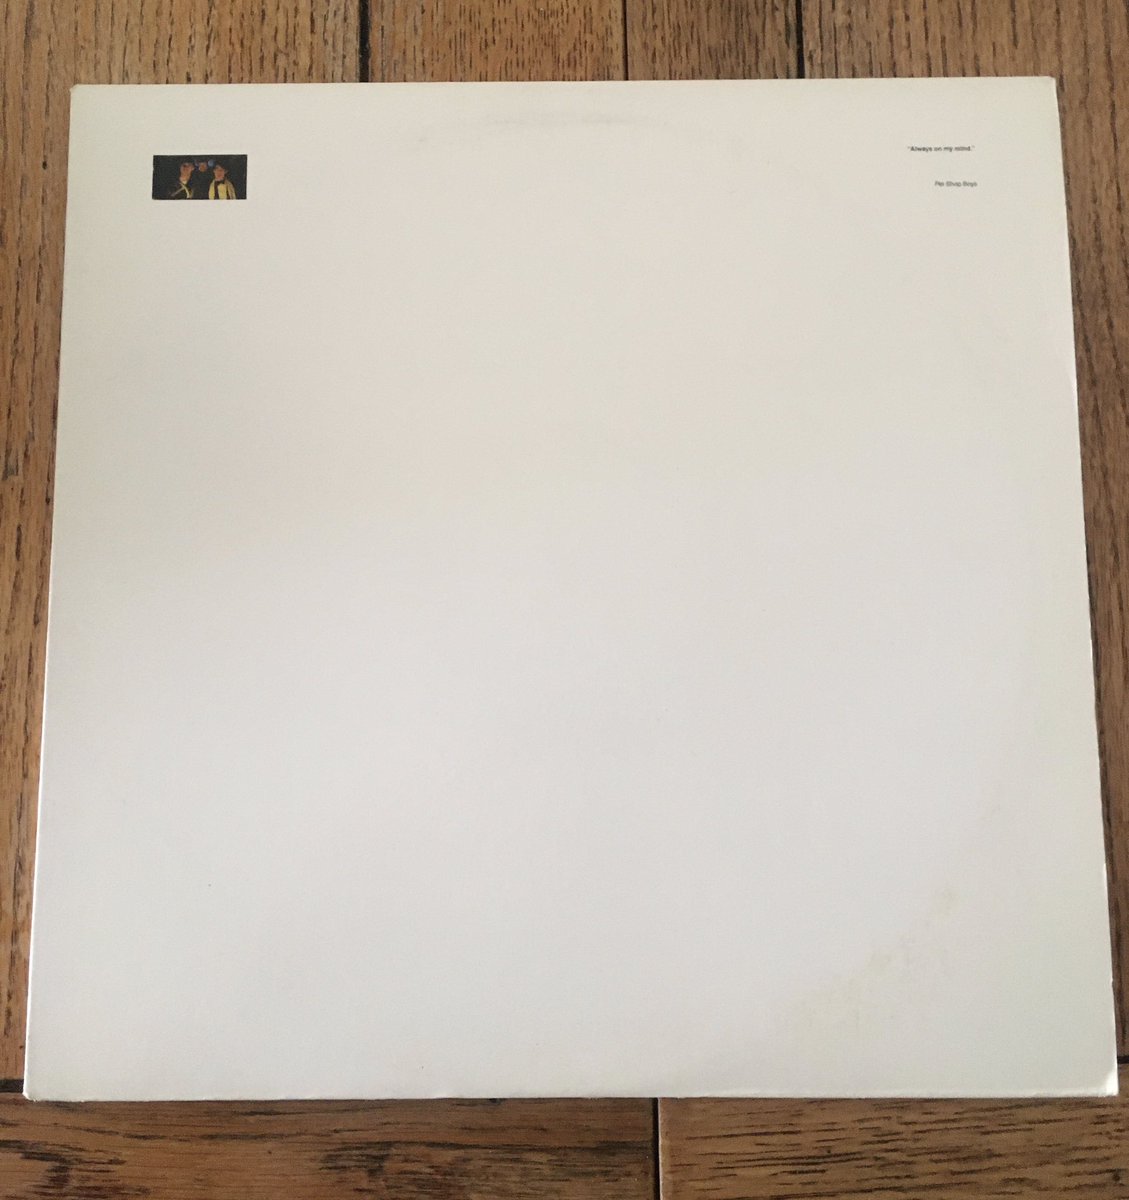 Dug out @petshopboys US 12” of Always On My Mind today. @phardingmusic remix is the definitive mix for me. What’s your favourite remix? #lockdownvinyl